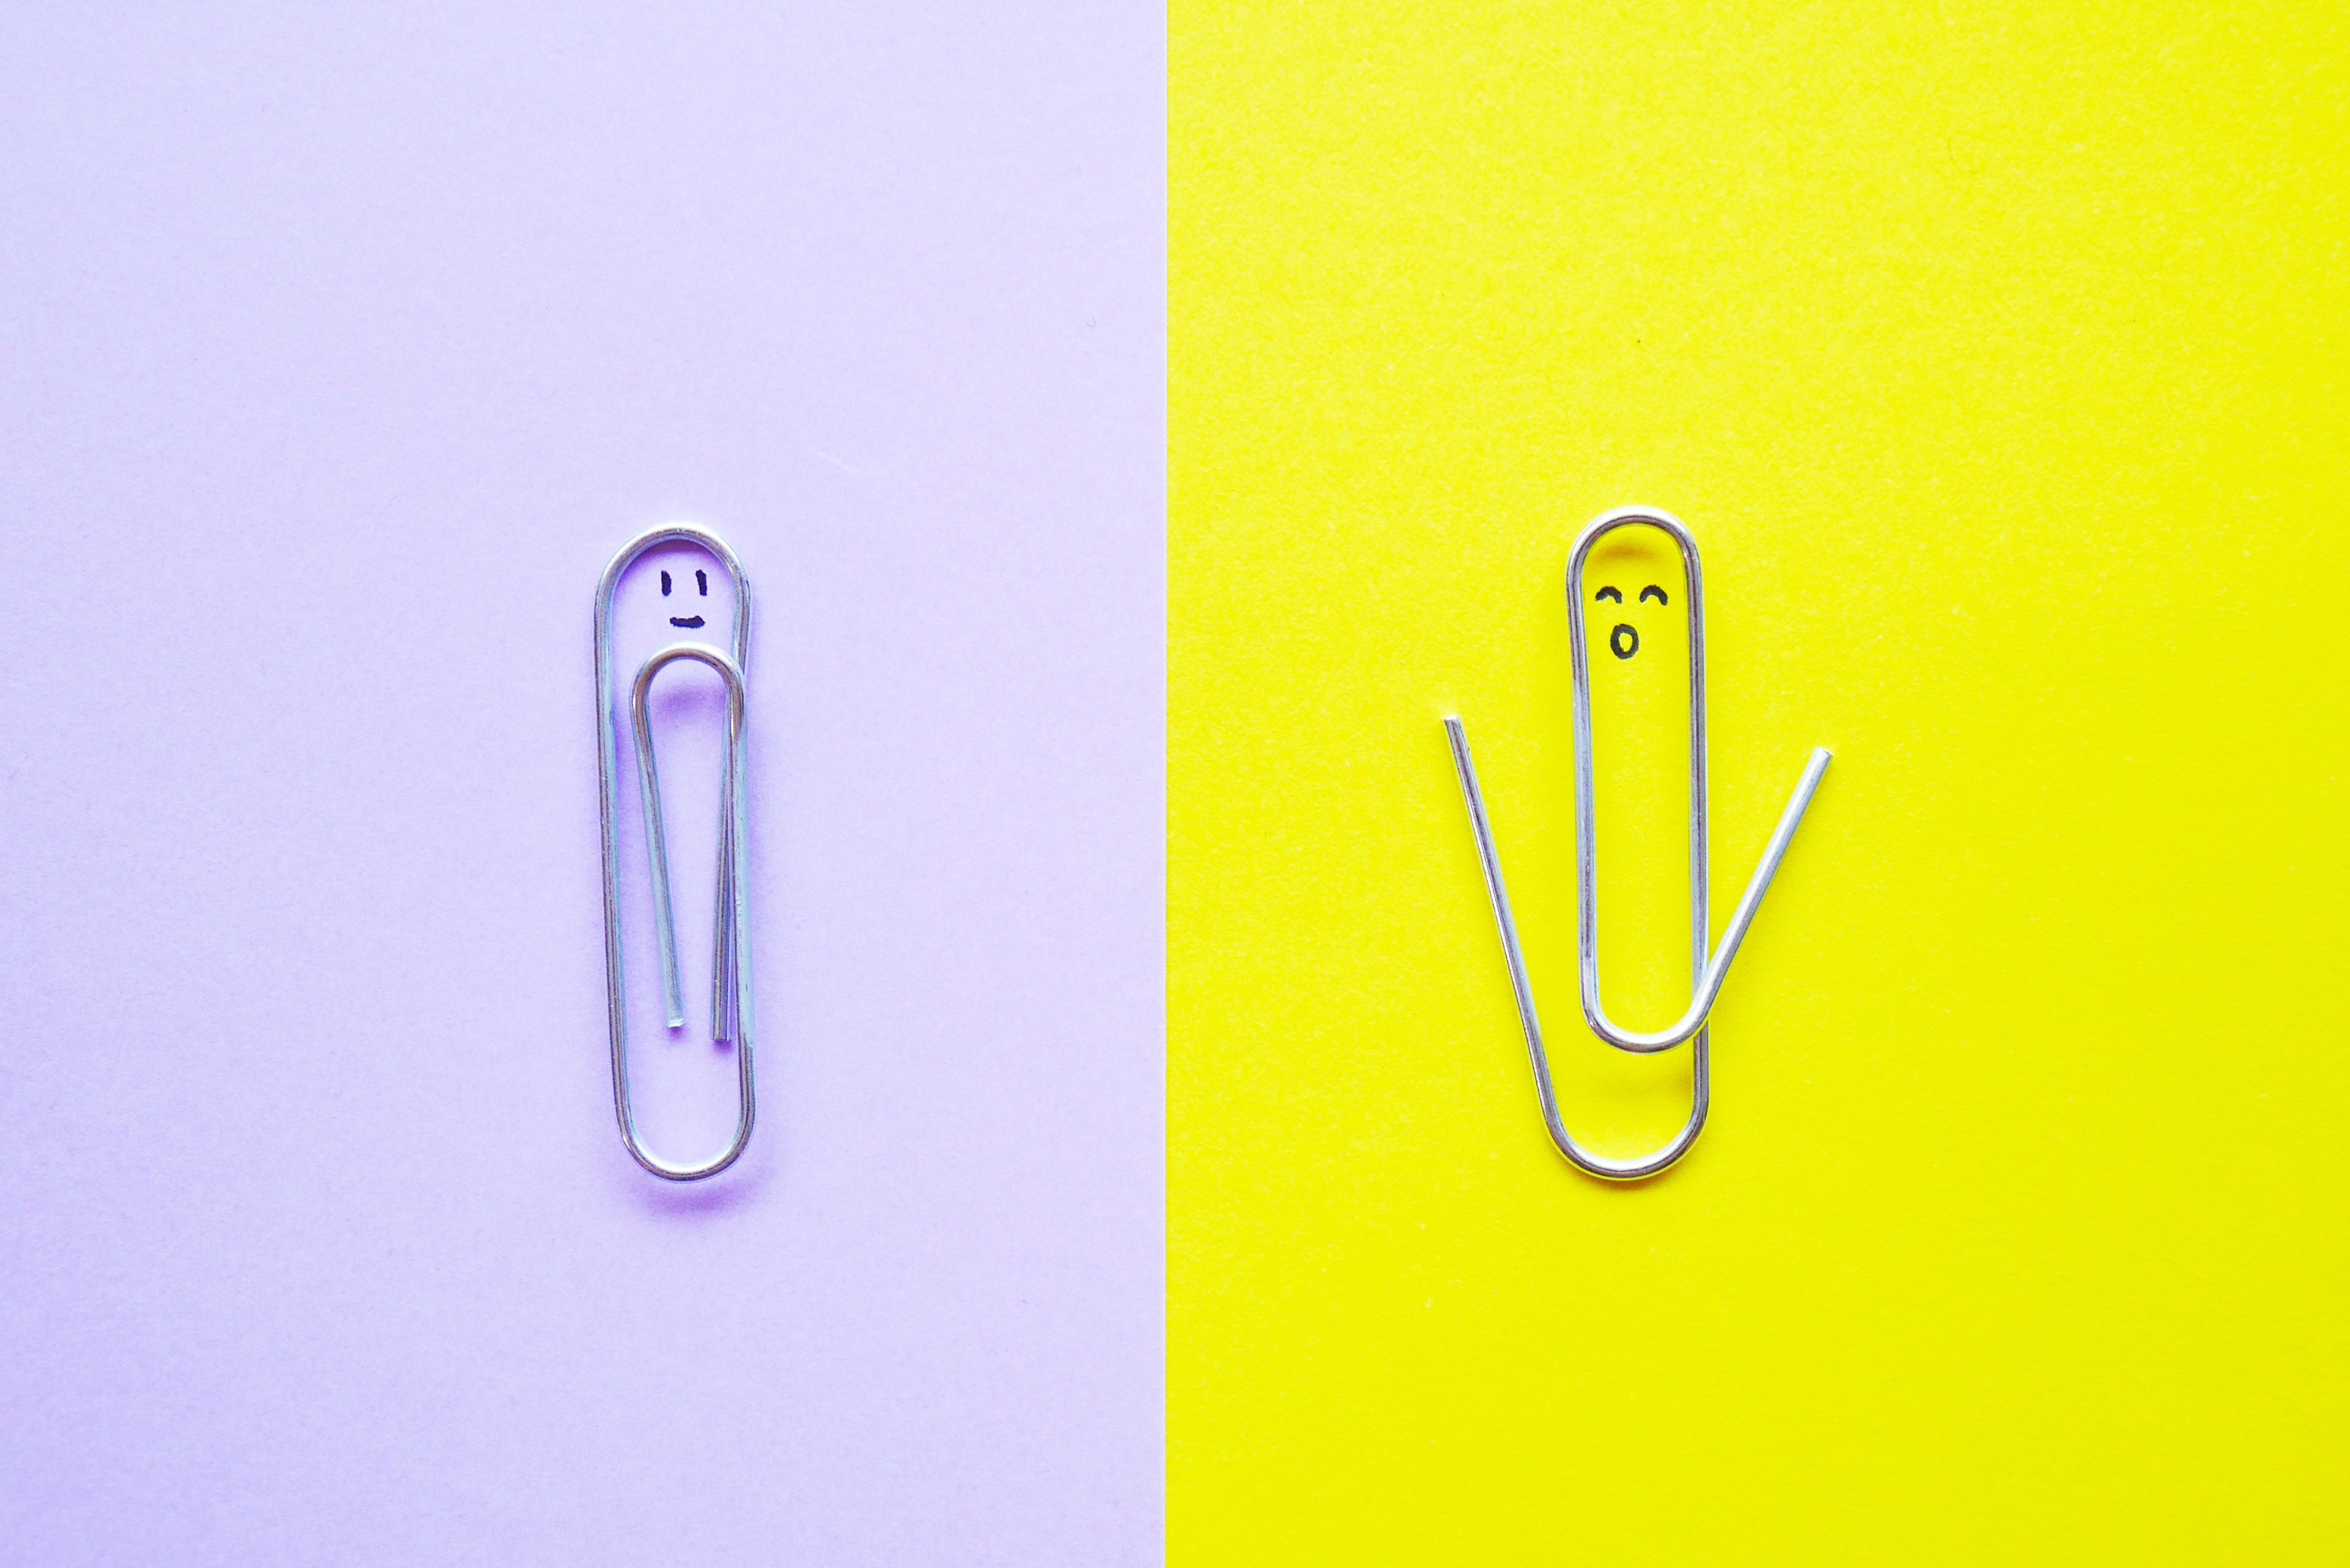 “People, not paperclips”: the key to successful recruitment